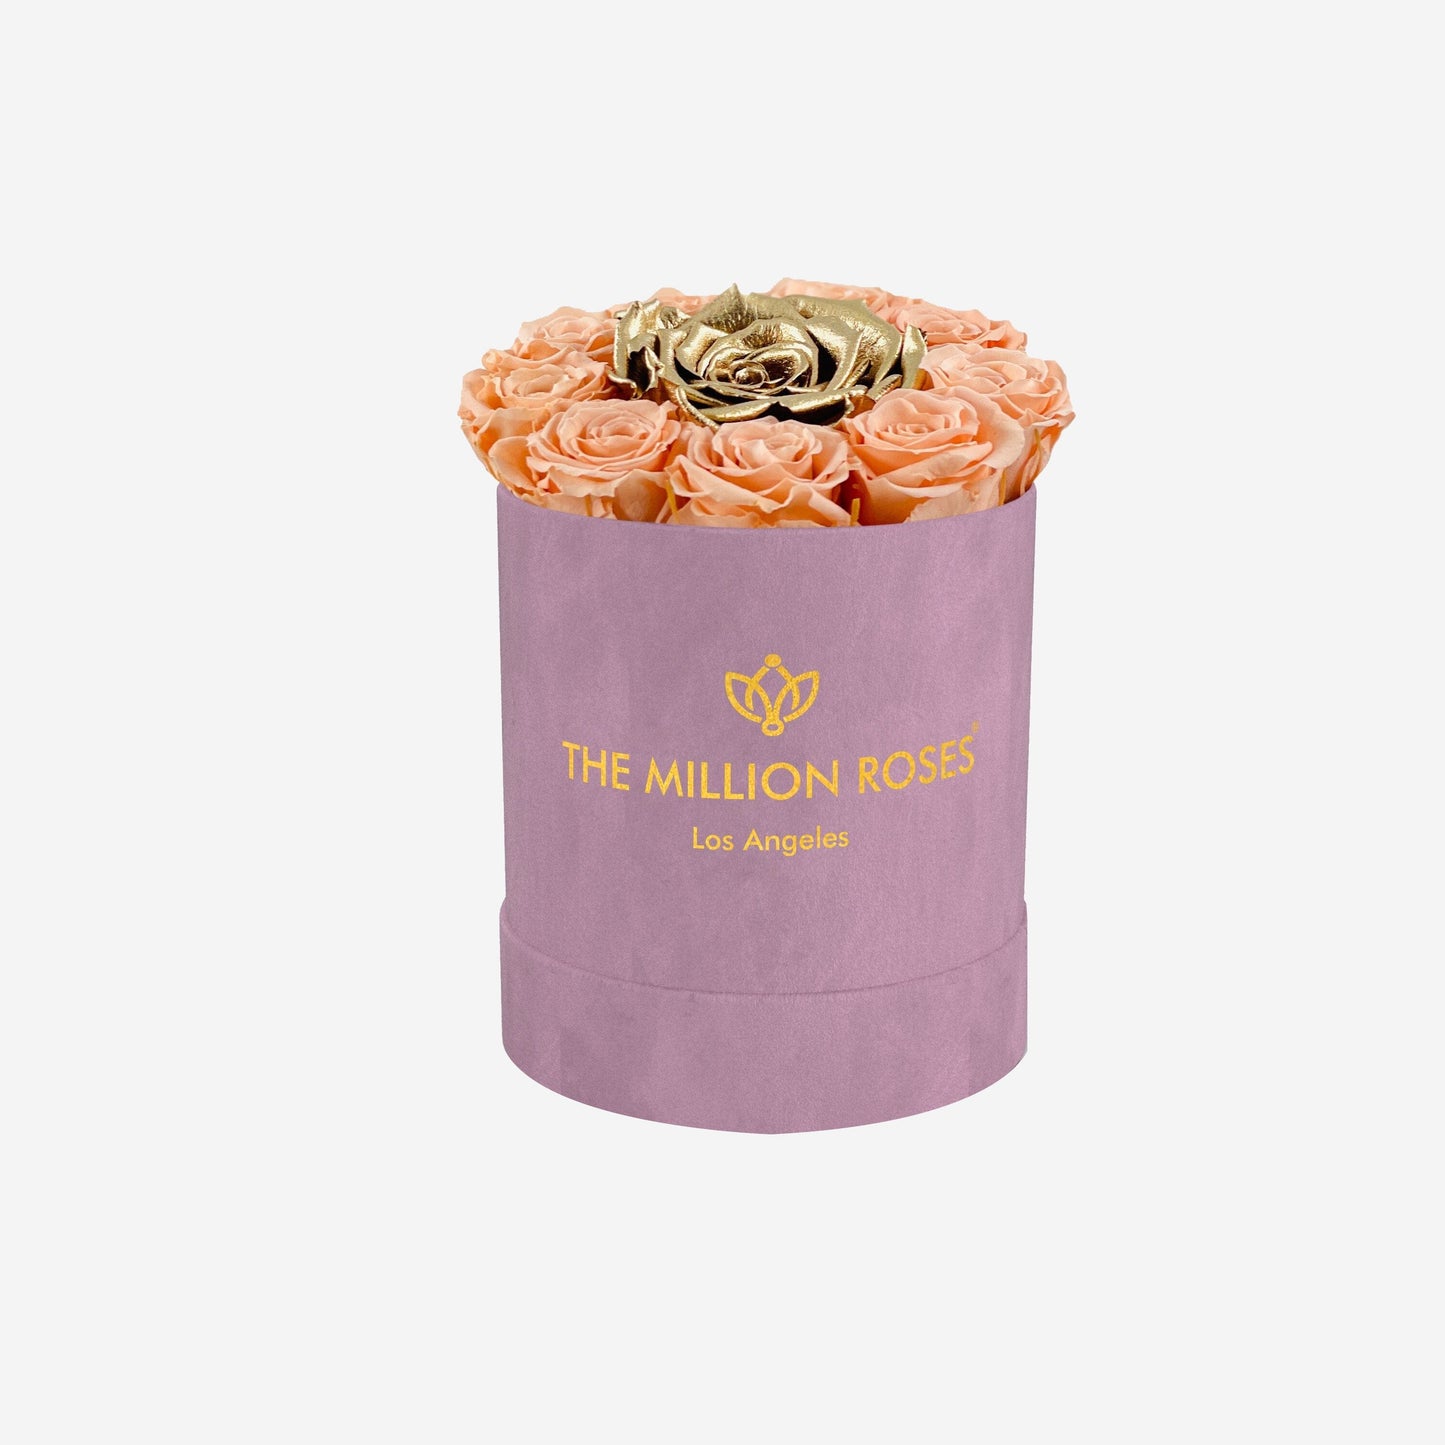 Basic Light Pink Suede Box | Peach & Gold Mini Roses - The Million Roses